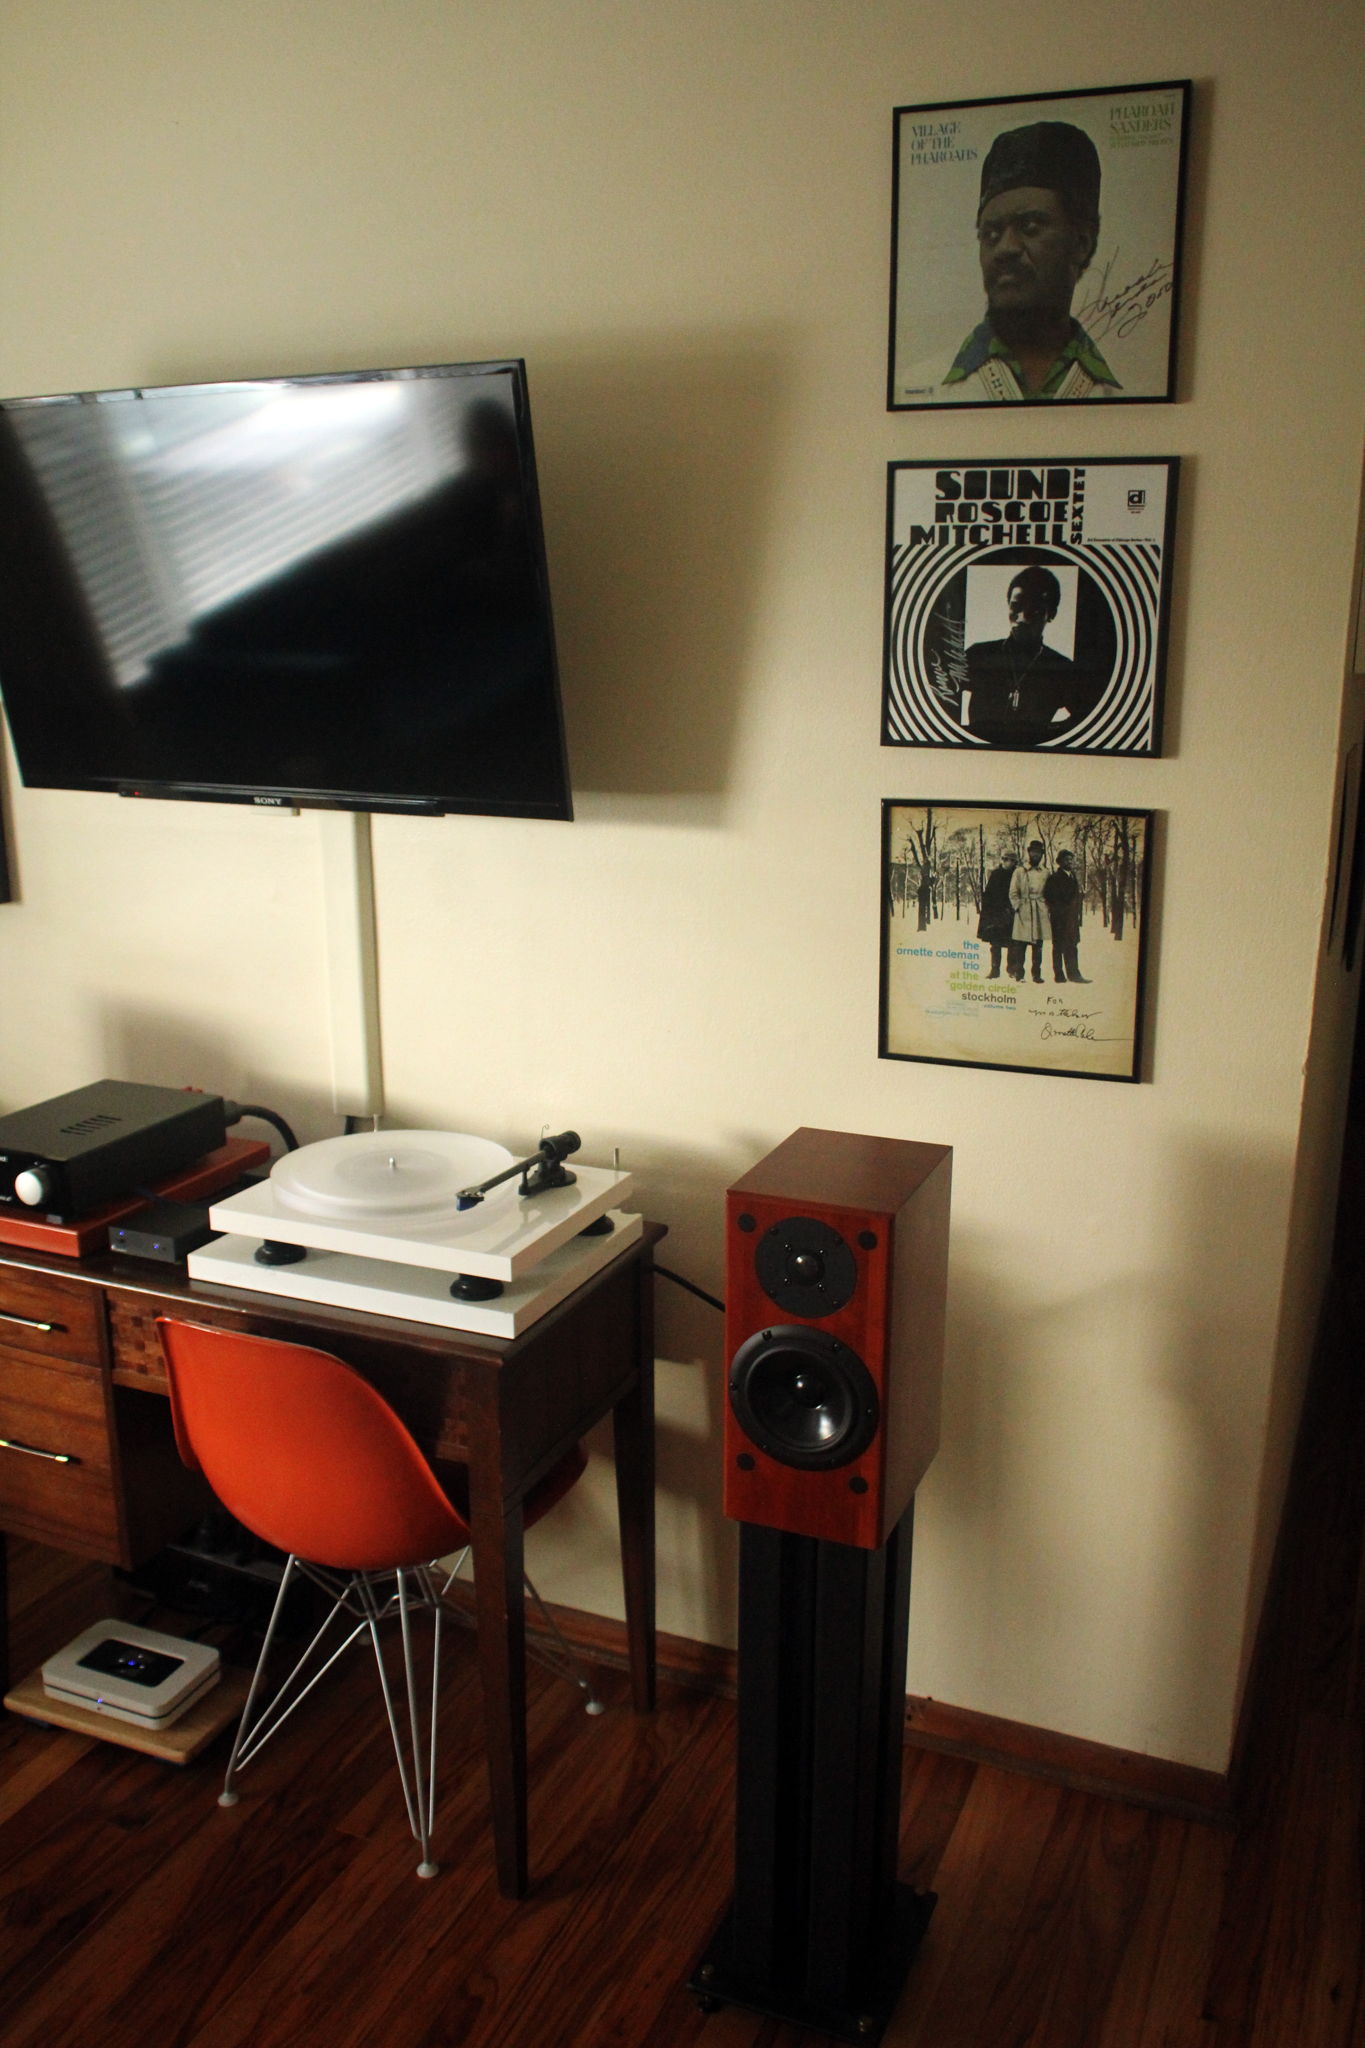 Autographed LPs by Ornette Coleman, Roscoe Mitchell, and Pharaoh Sanders watch over.